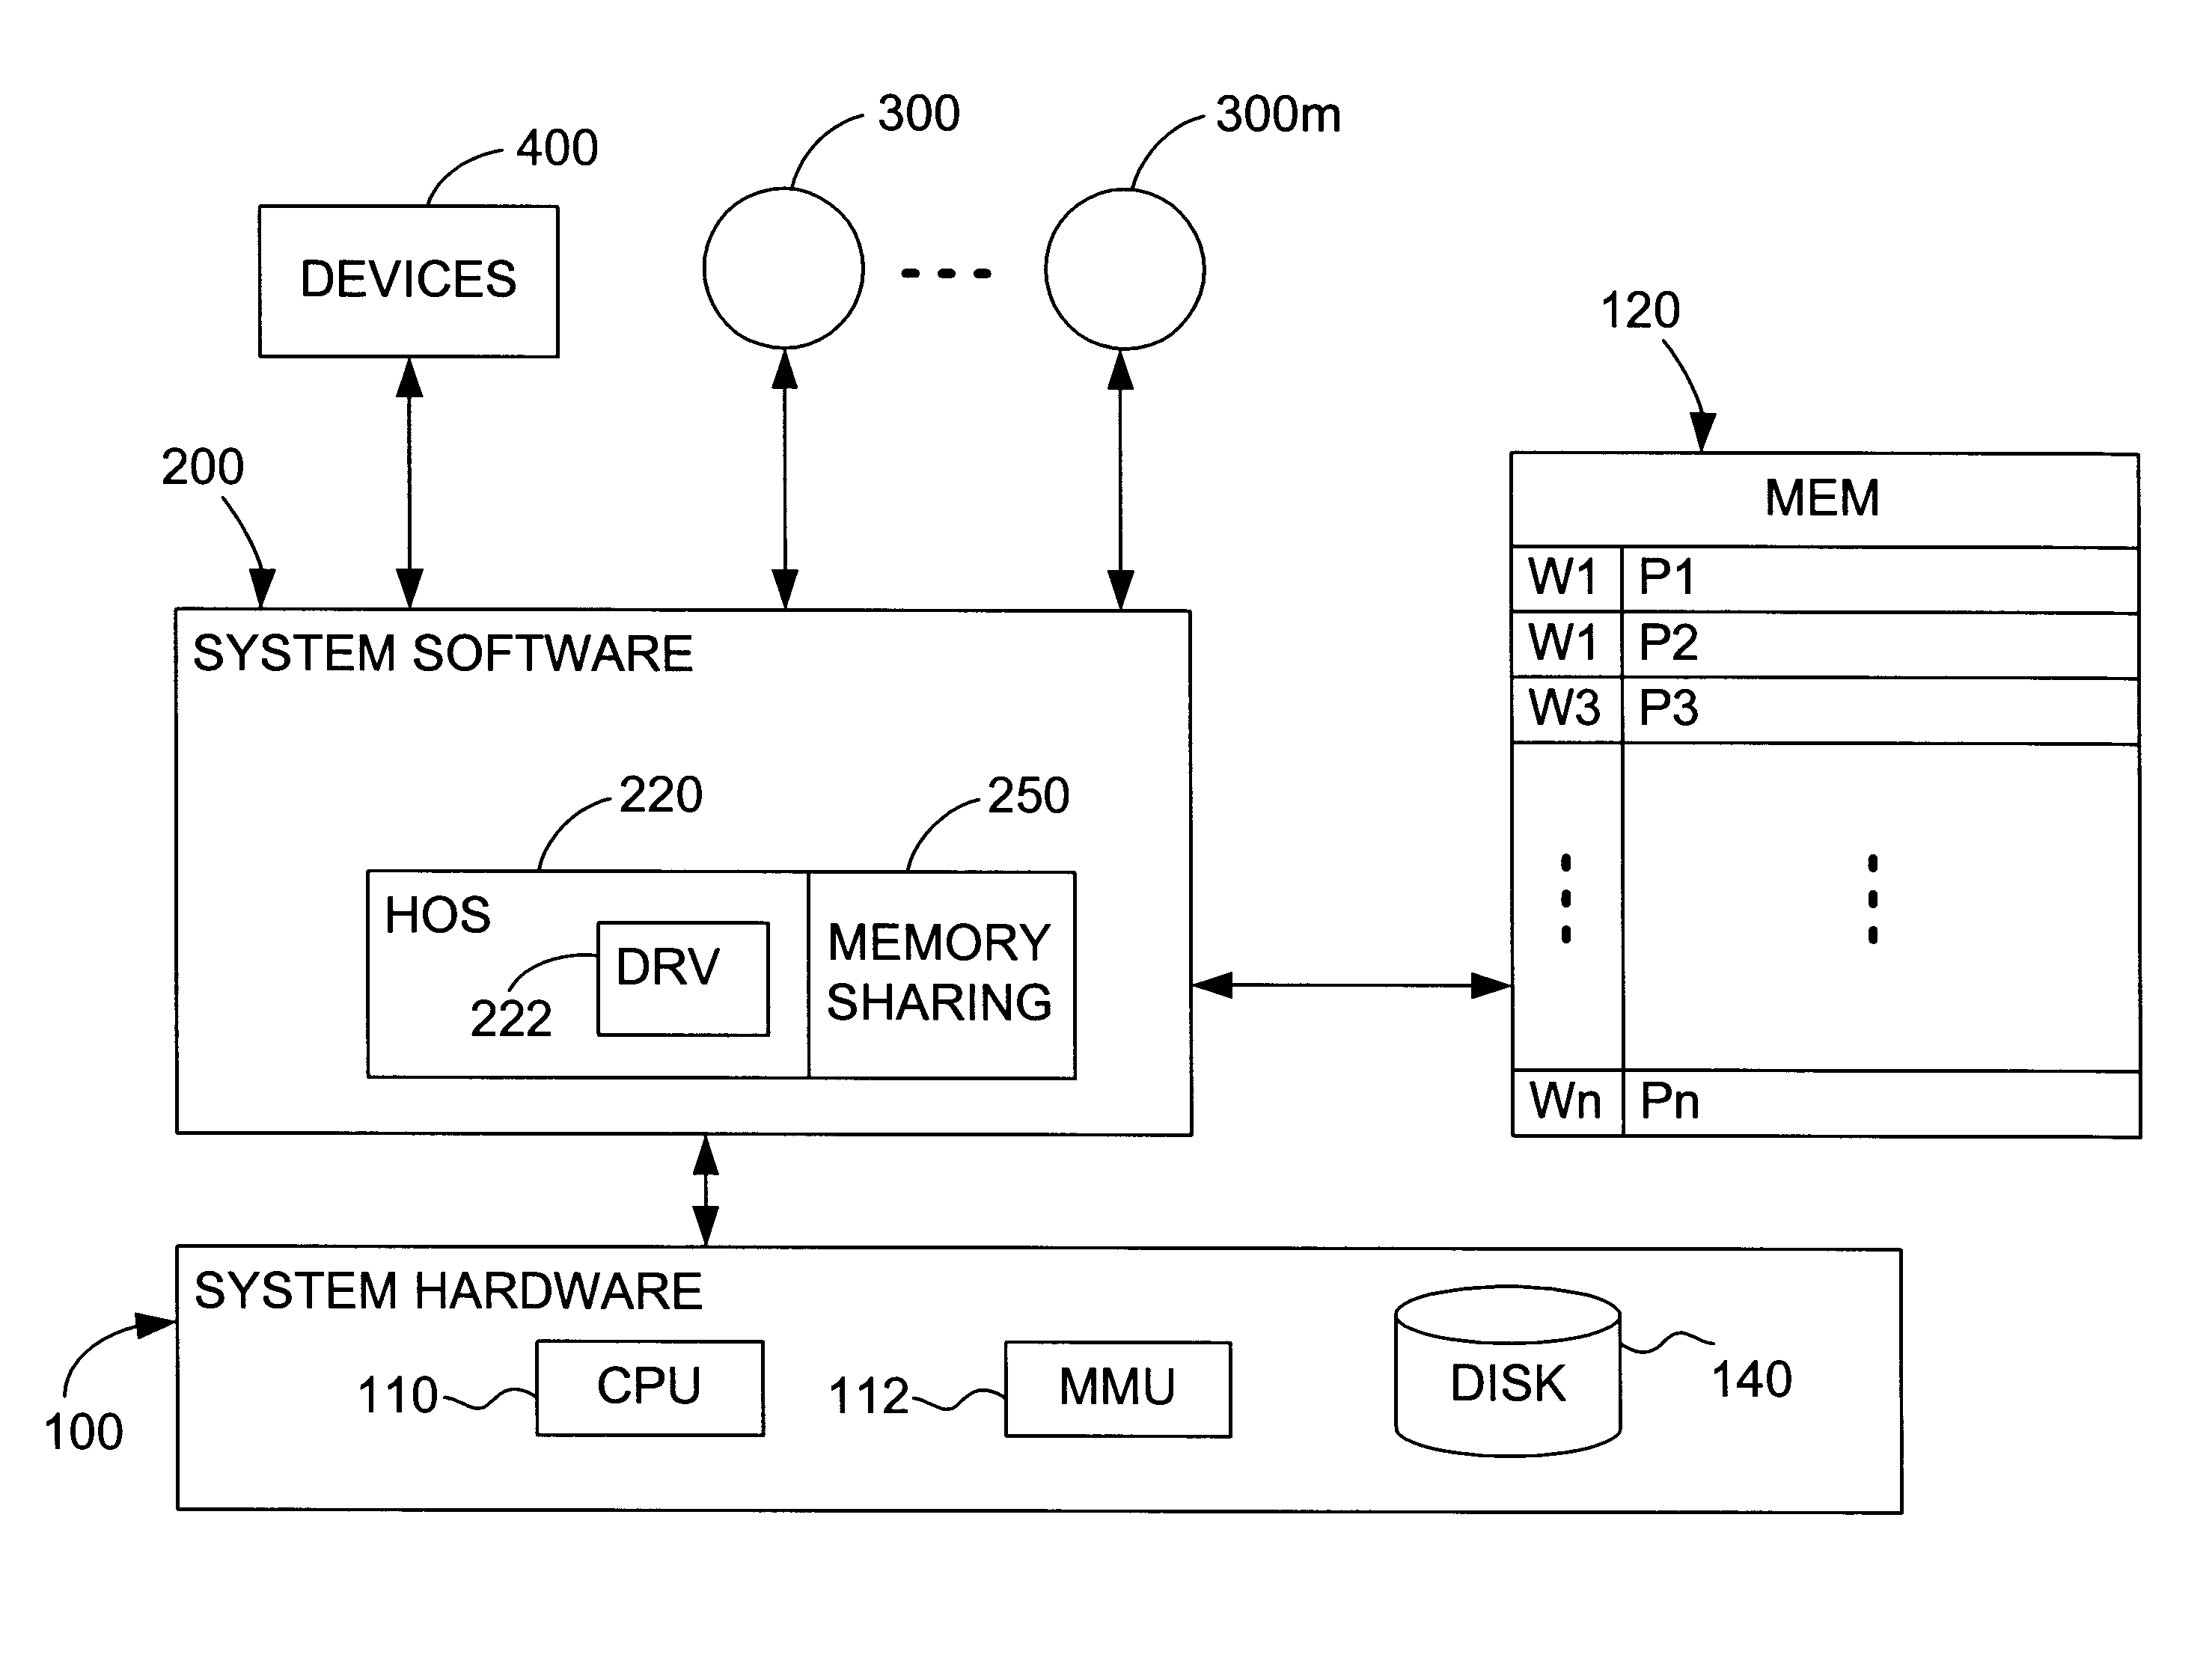 Content-based, transparent sharing of memory units